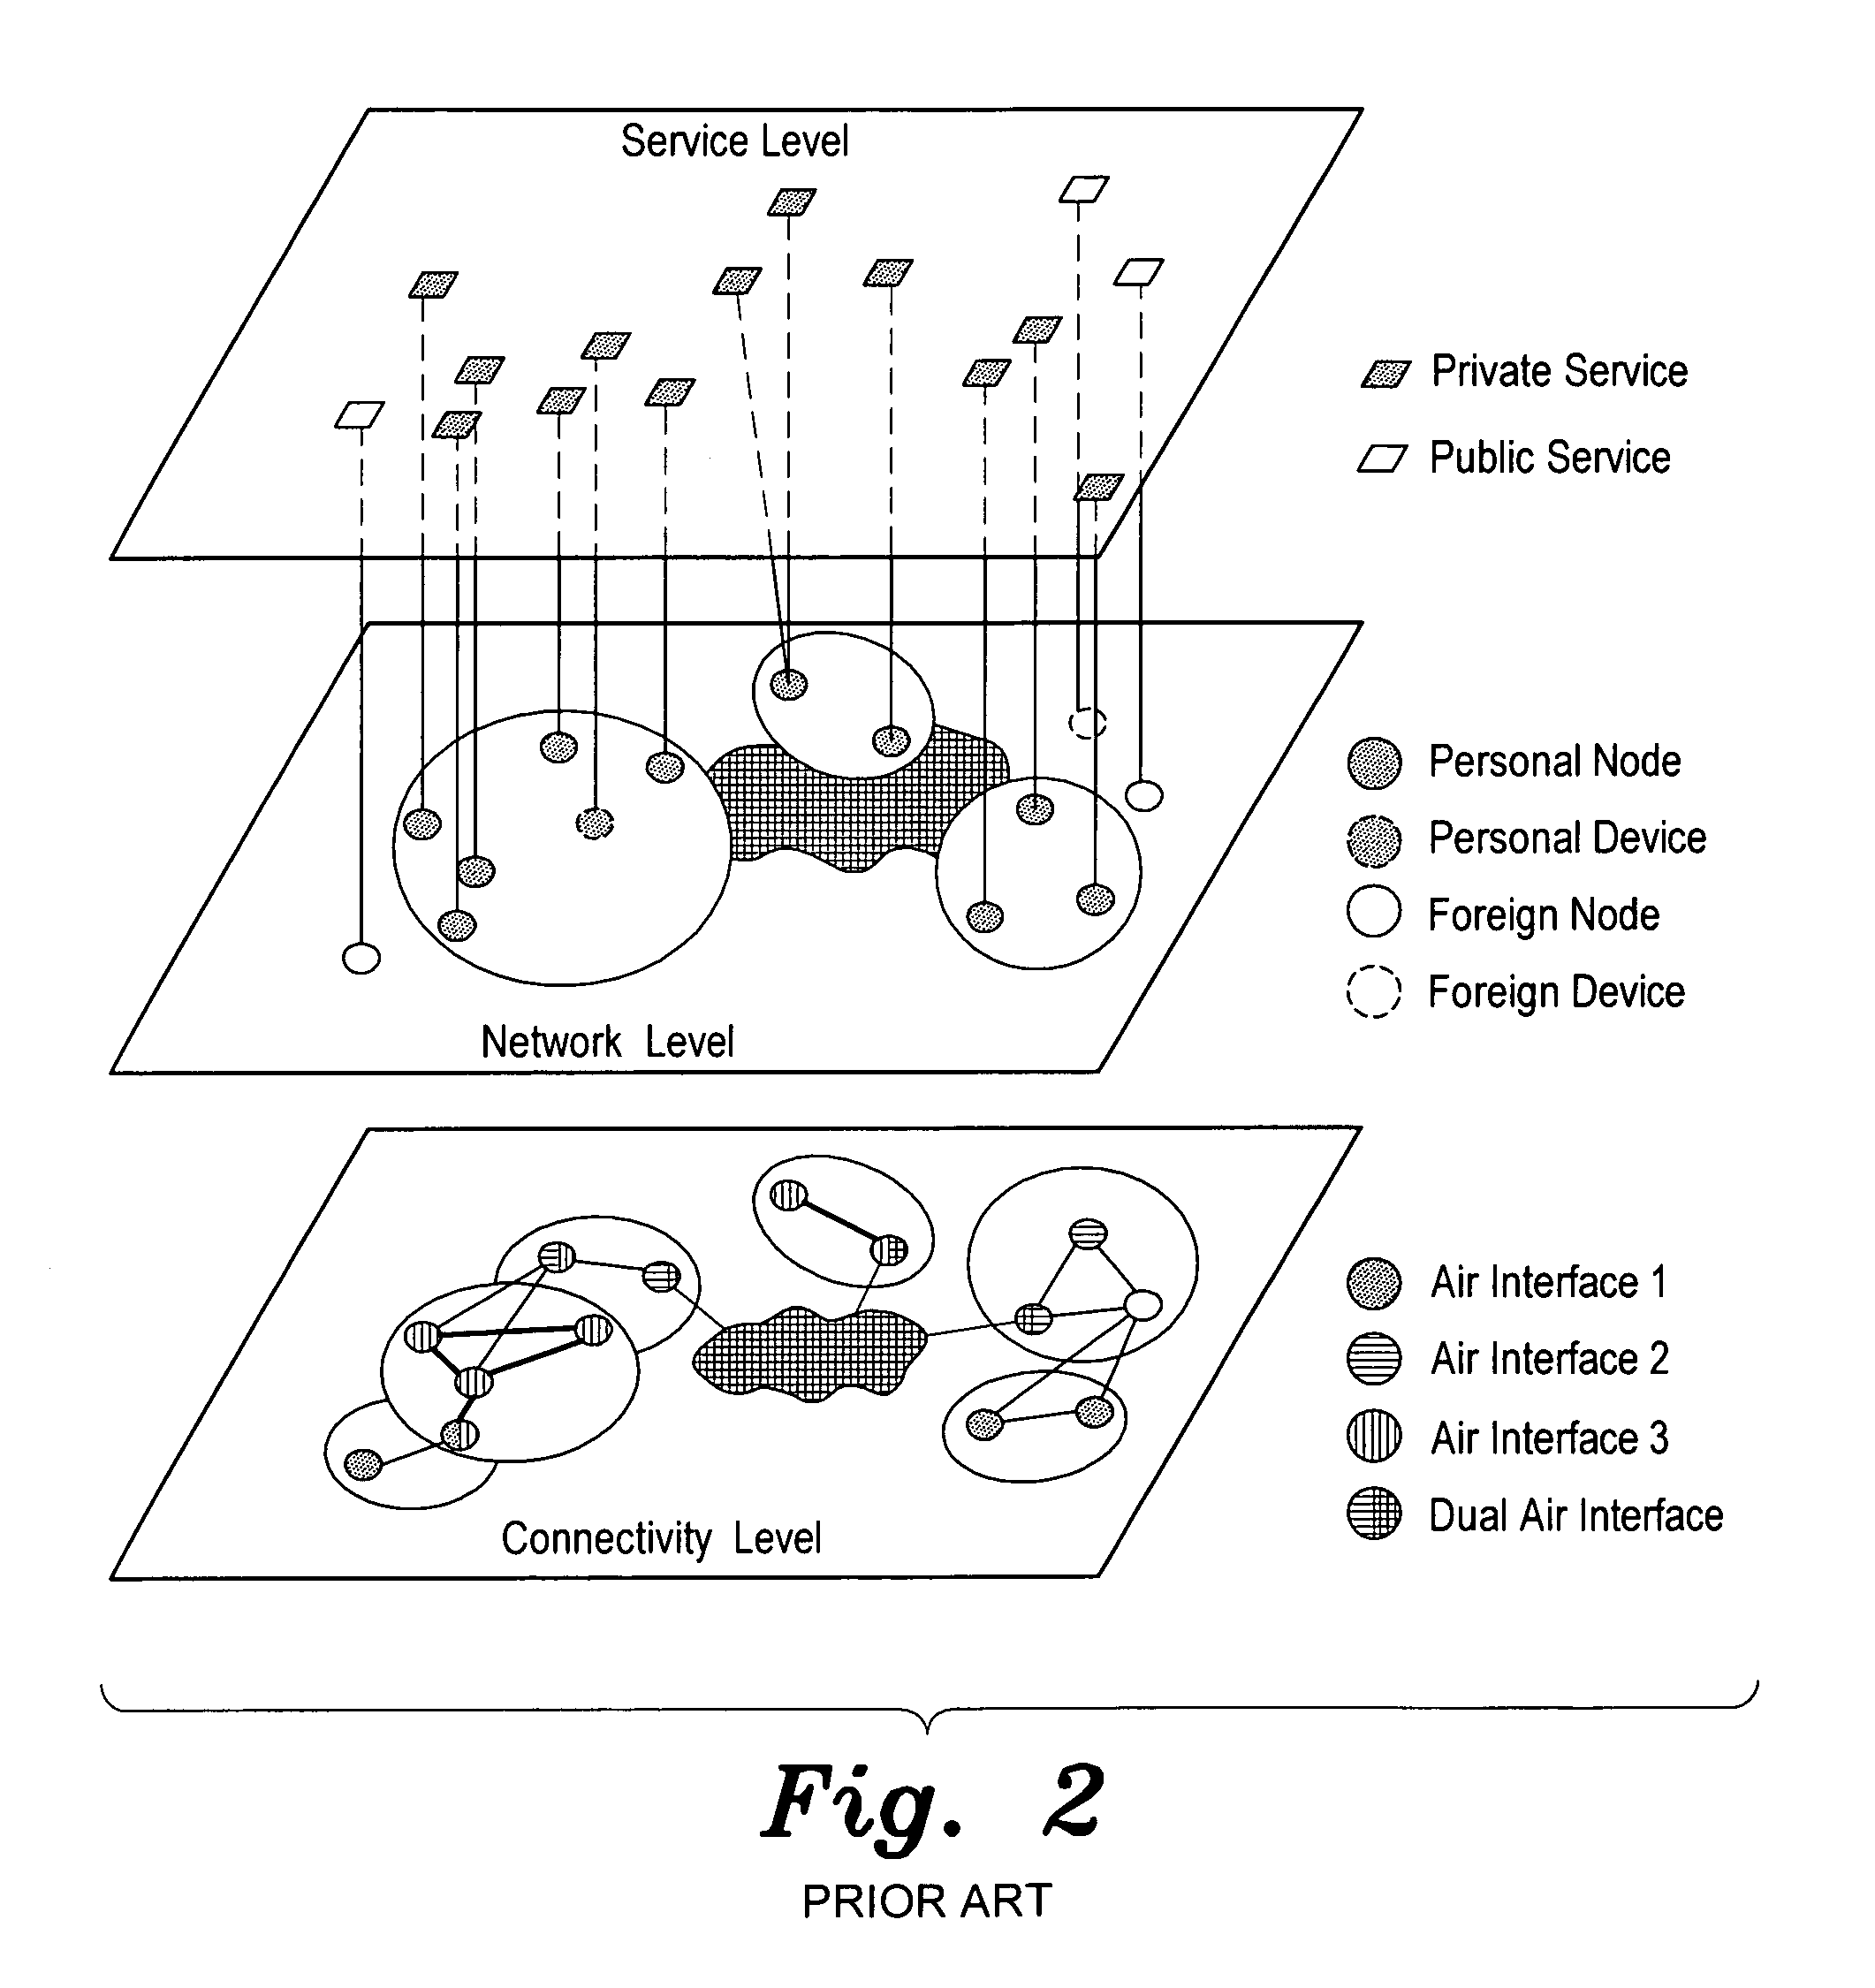 Method of forming a personal mobile grid system and resource scheduling thereon